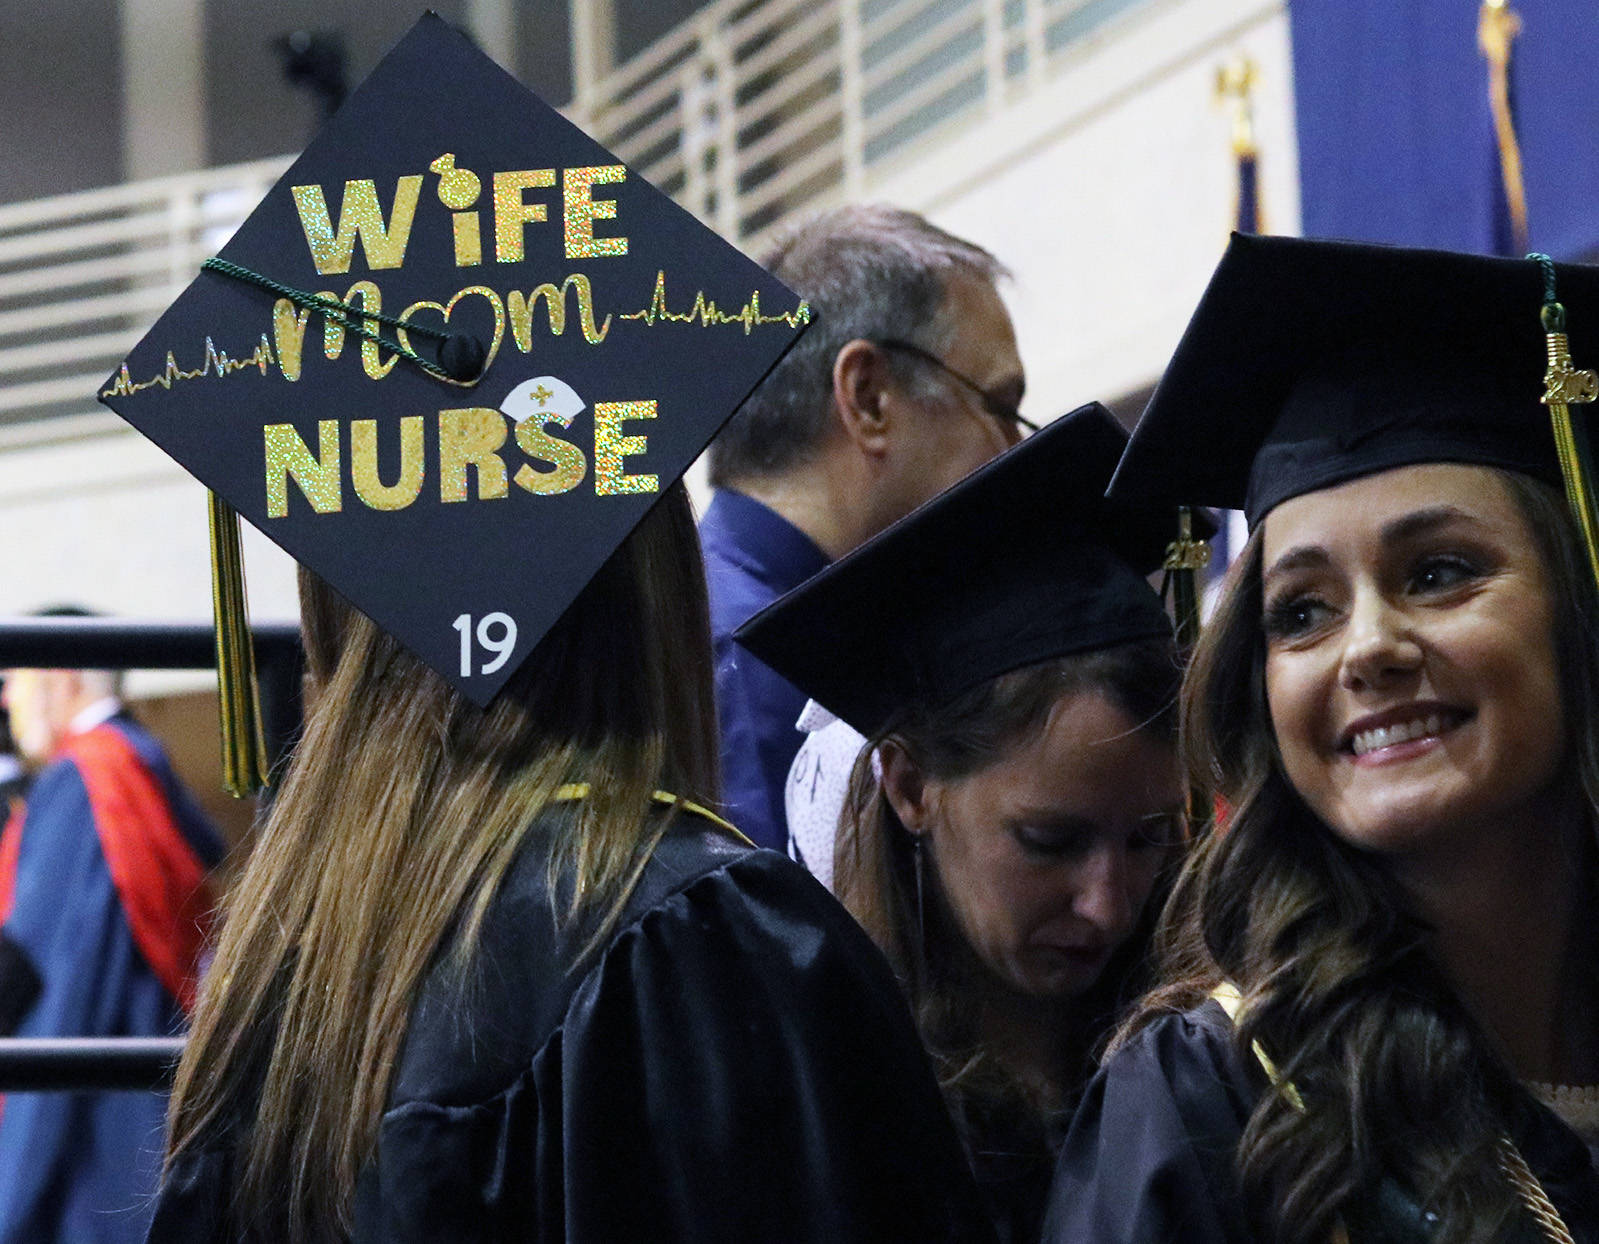 A graduate’s hat reads “Wife mom nurse” on Sunday during the University of Alaska Southeast commencement ceremony.